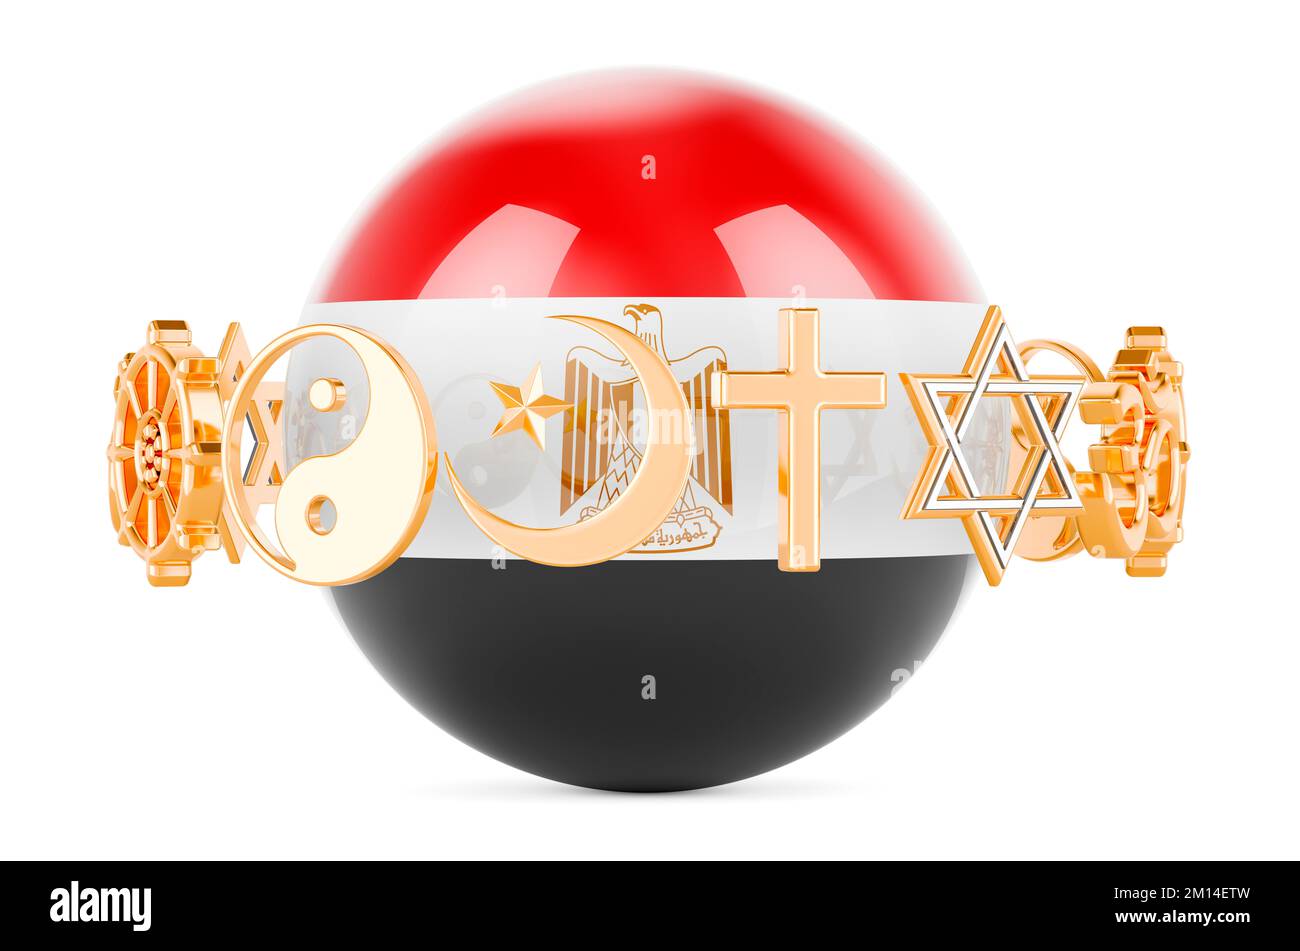 Egyptian flag painted on sphere with religions symbols around, 3D rendering isolated on white background Stock Photo